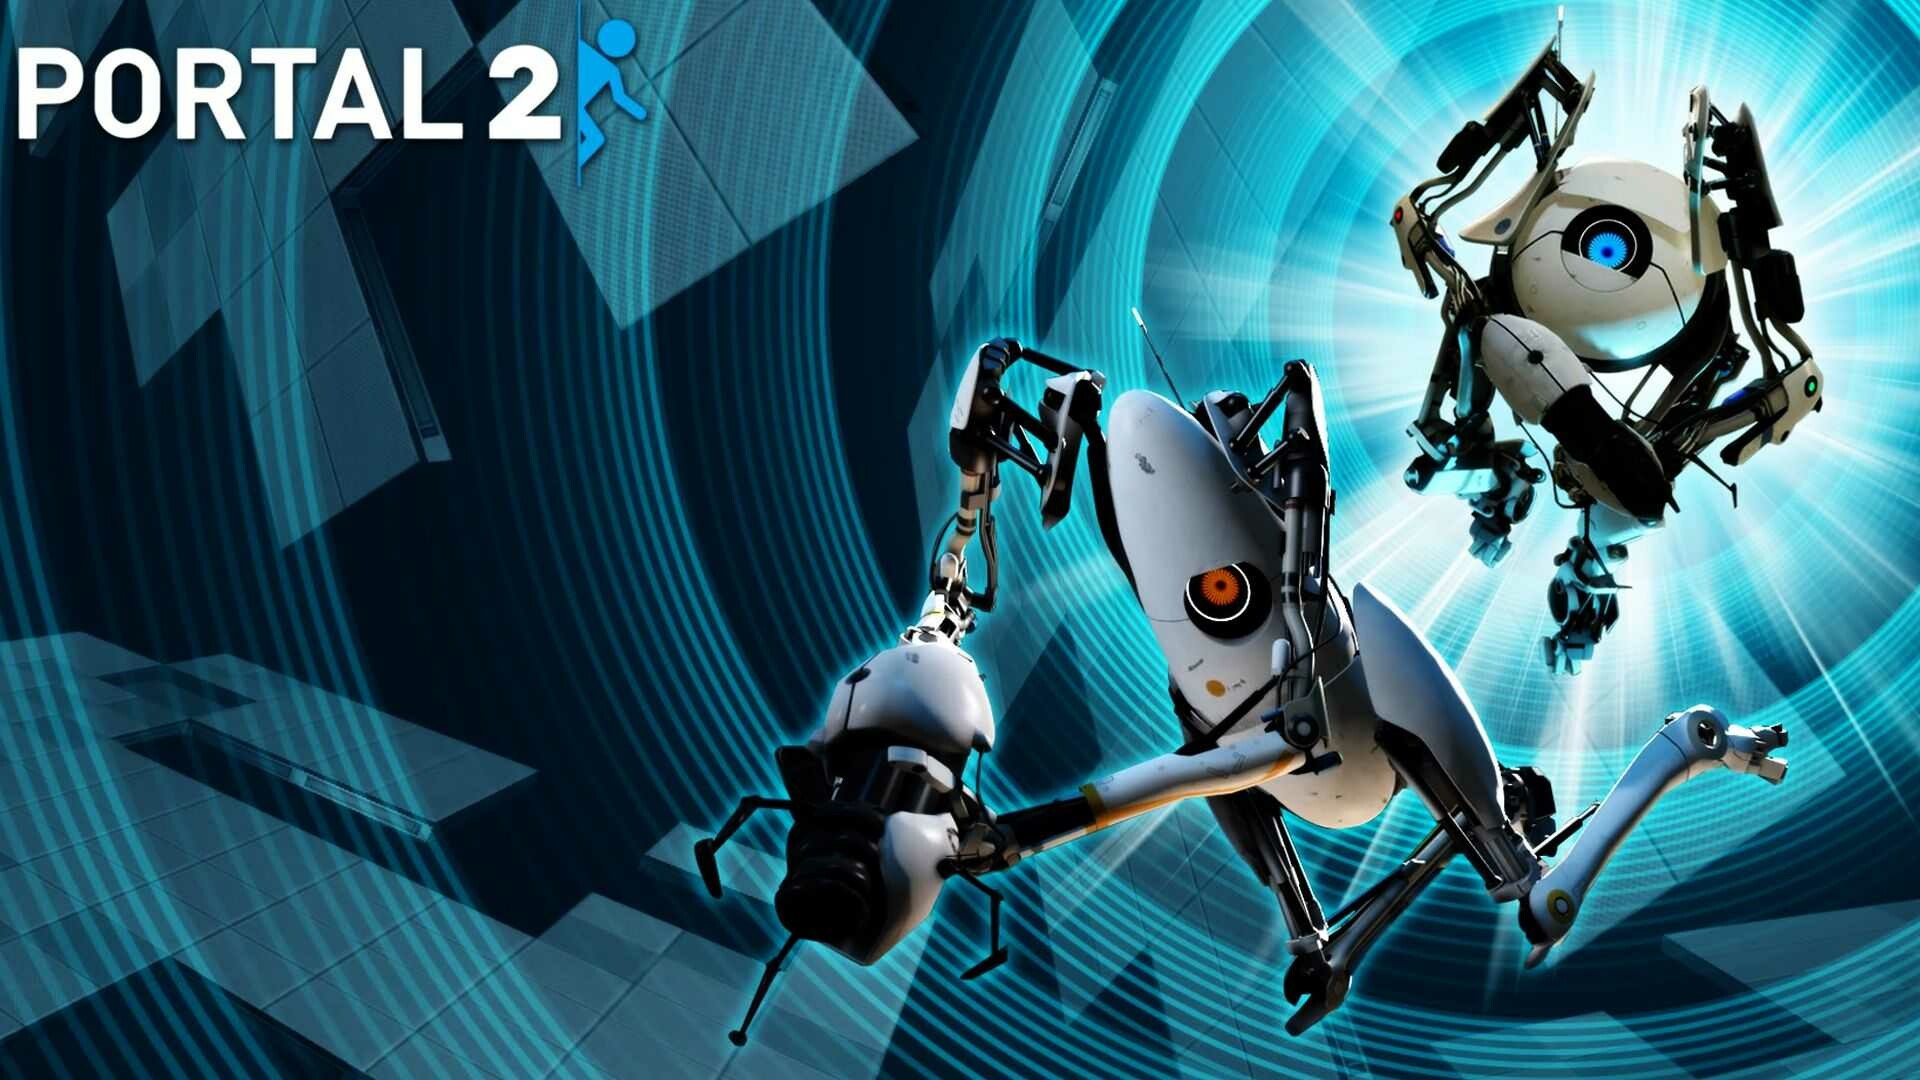 Portal 2 (Game): It features a single-player story set after the events of Portal's story, and a brand-new Co-op game mode, featuring additional test chambers designed specifically for Co-operative play. 1920x1080 Full HD Wallpaper.